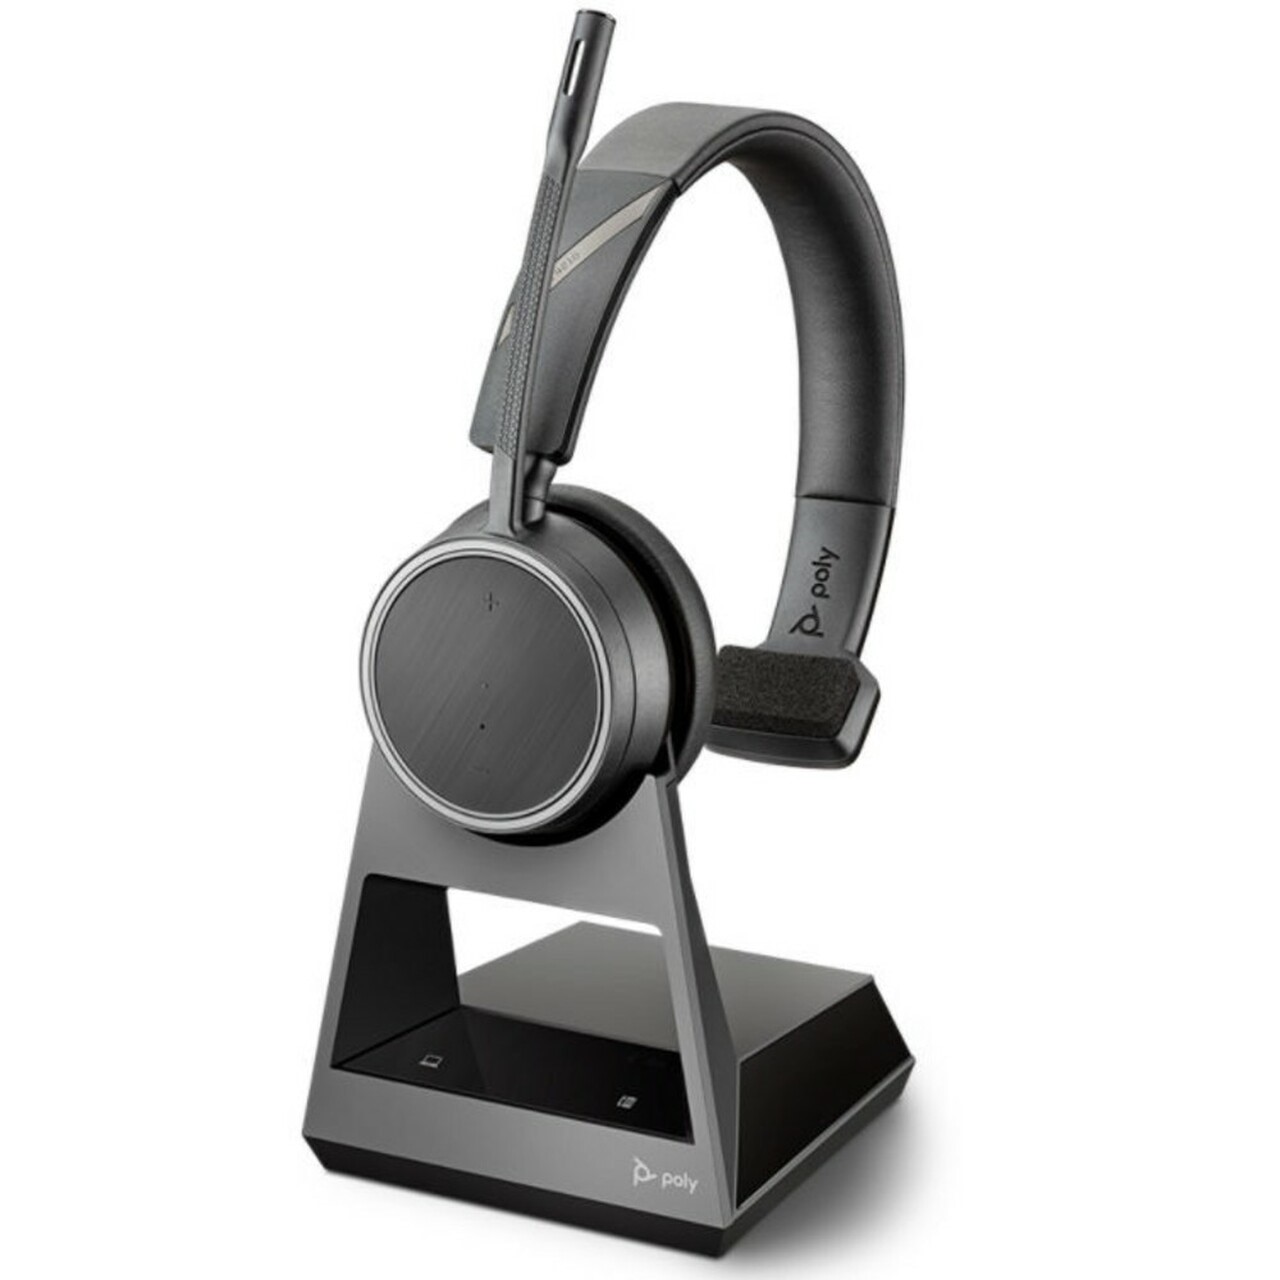 PL-212730-05 A favorite of office workers and IT professionals — the Voyager 4200 UC Series. Some office workers prefer a stereo headset to listen to media and music.